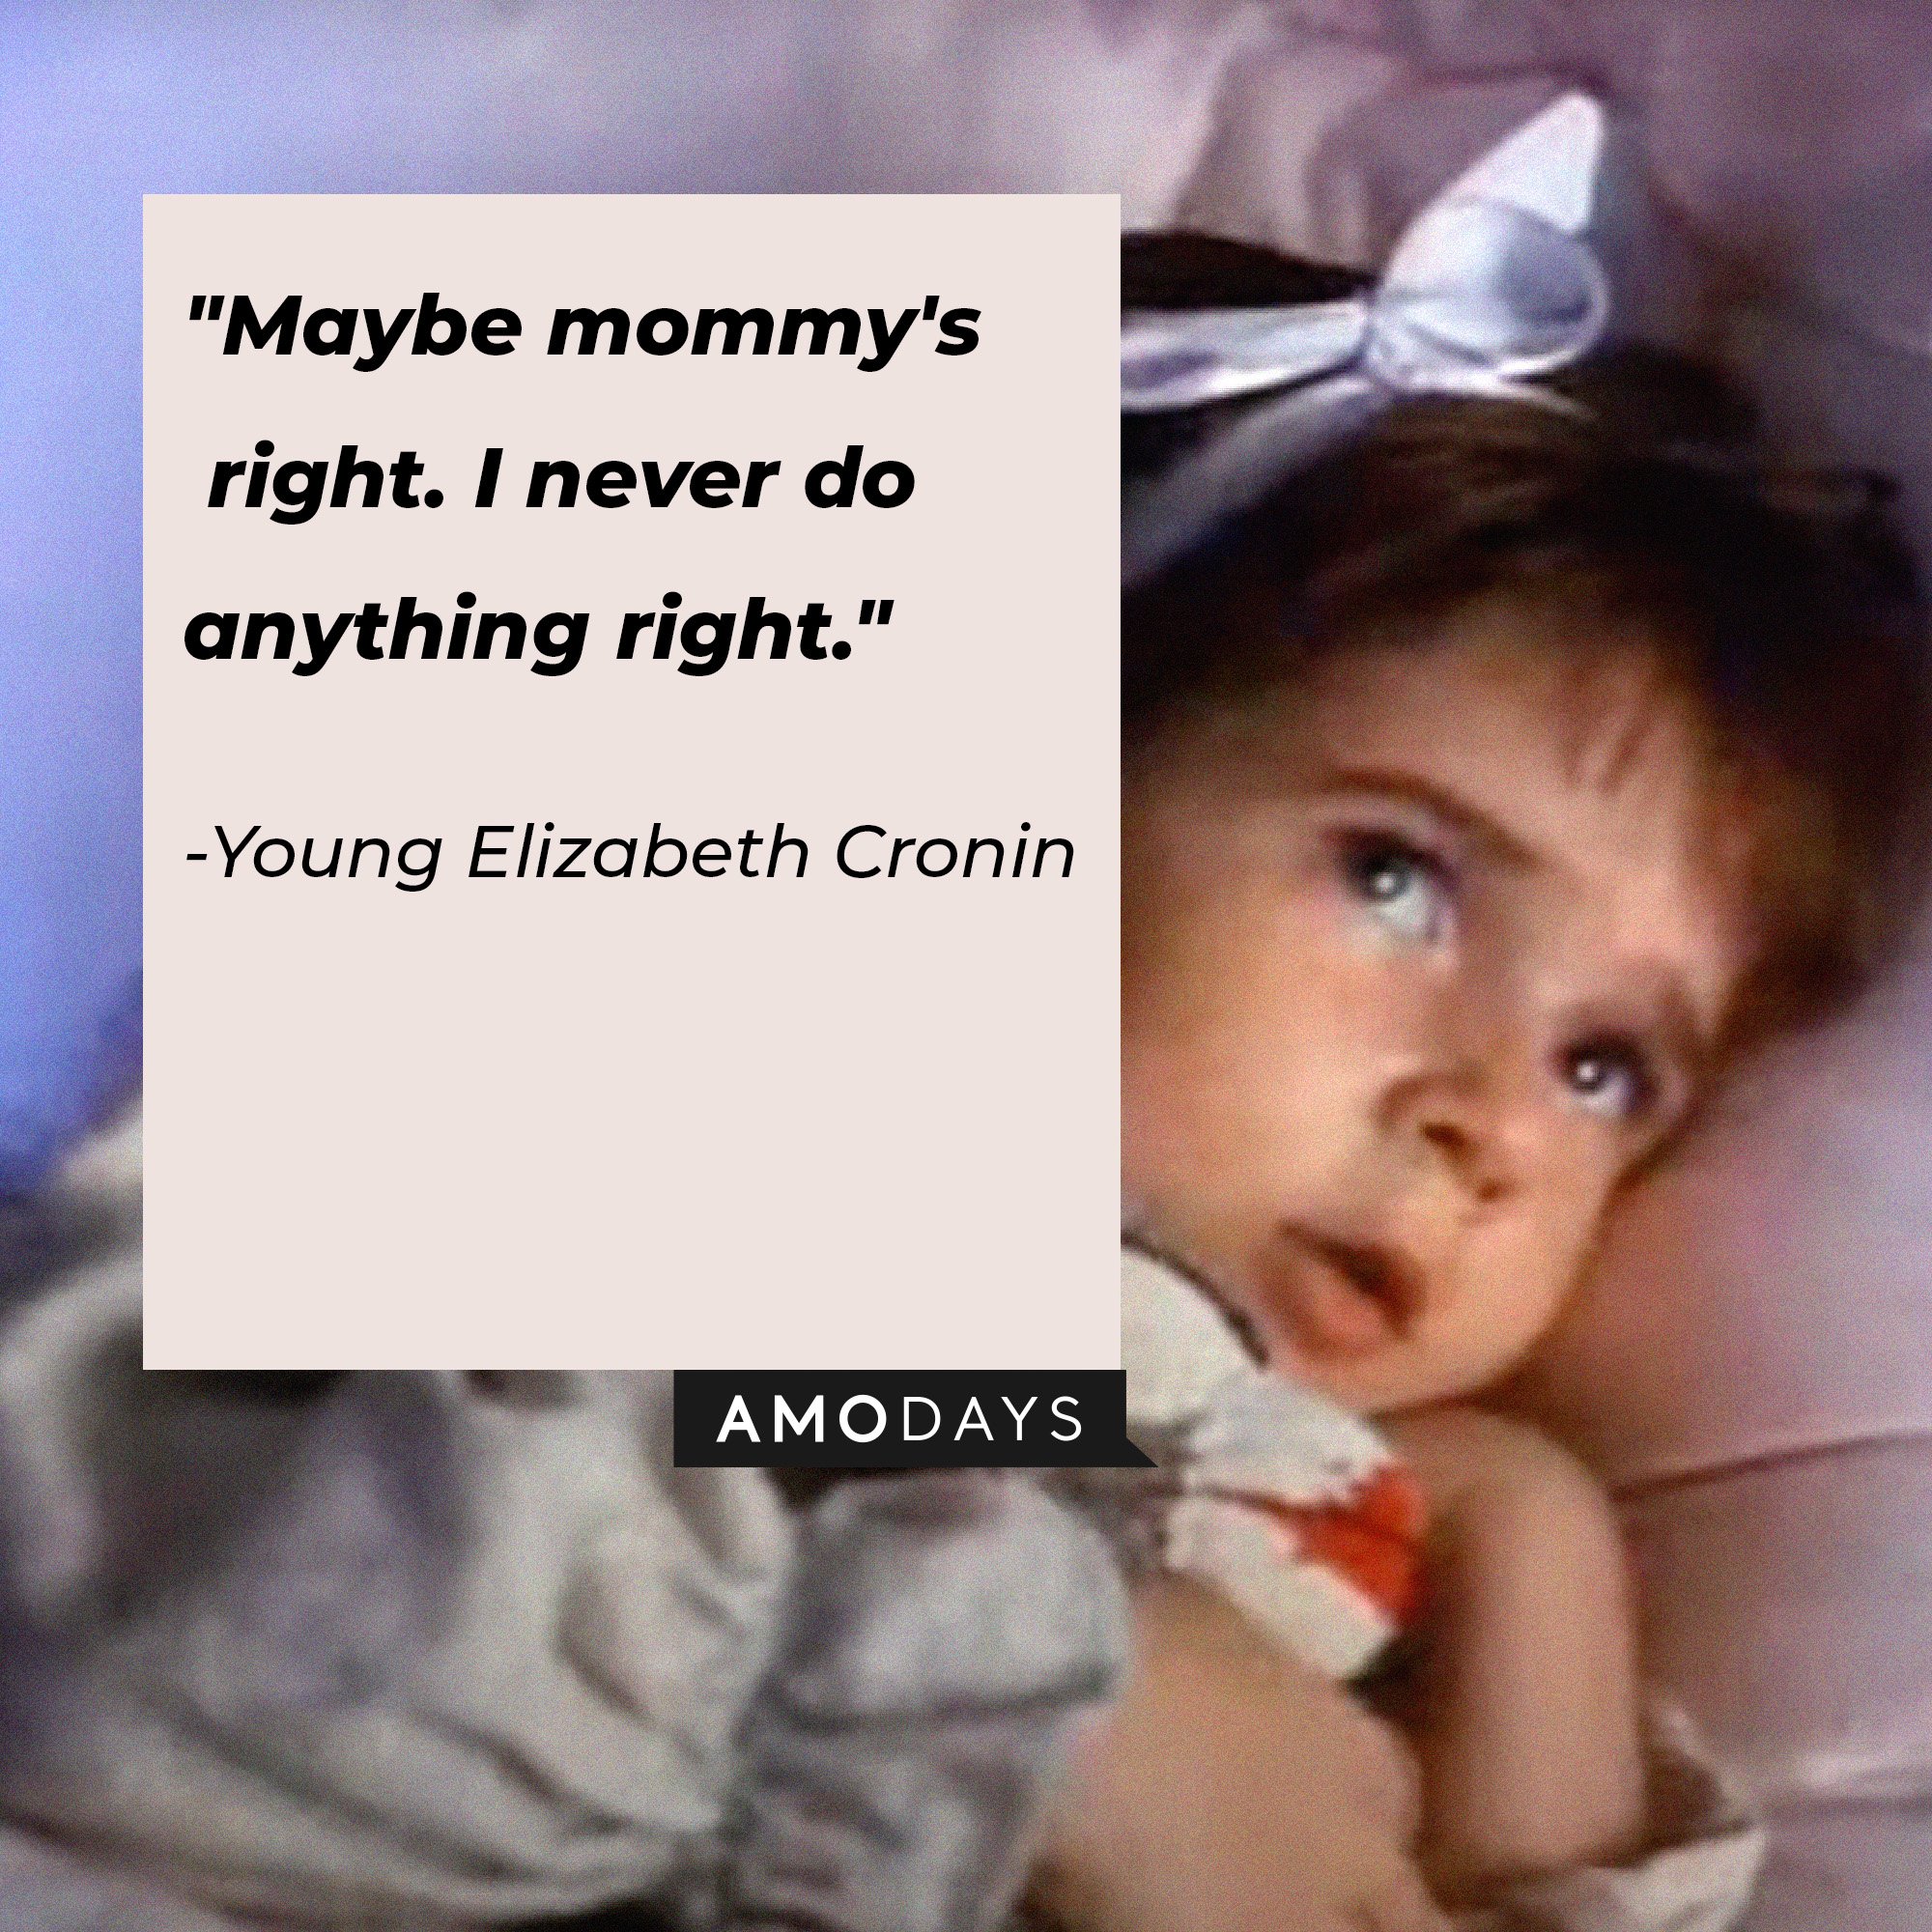 Young Elizabeth Cronin’s quote: "Maybe mommy's right. I never do anything right." | Image: AmoDays